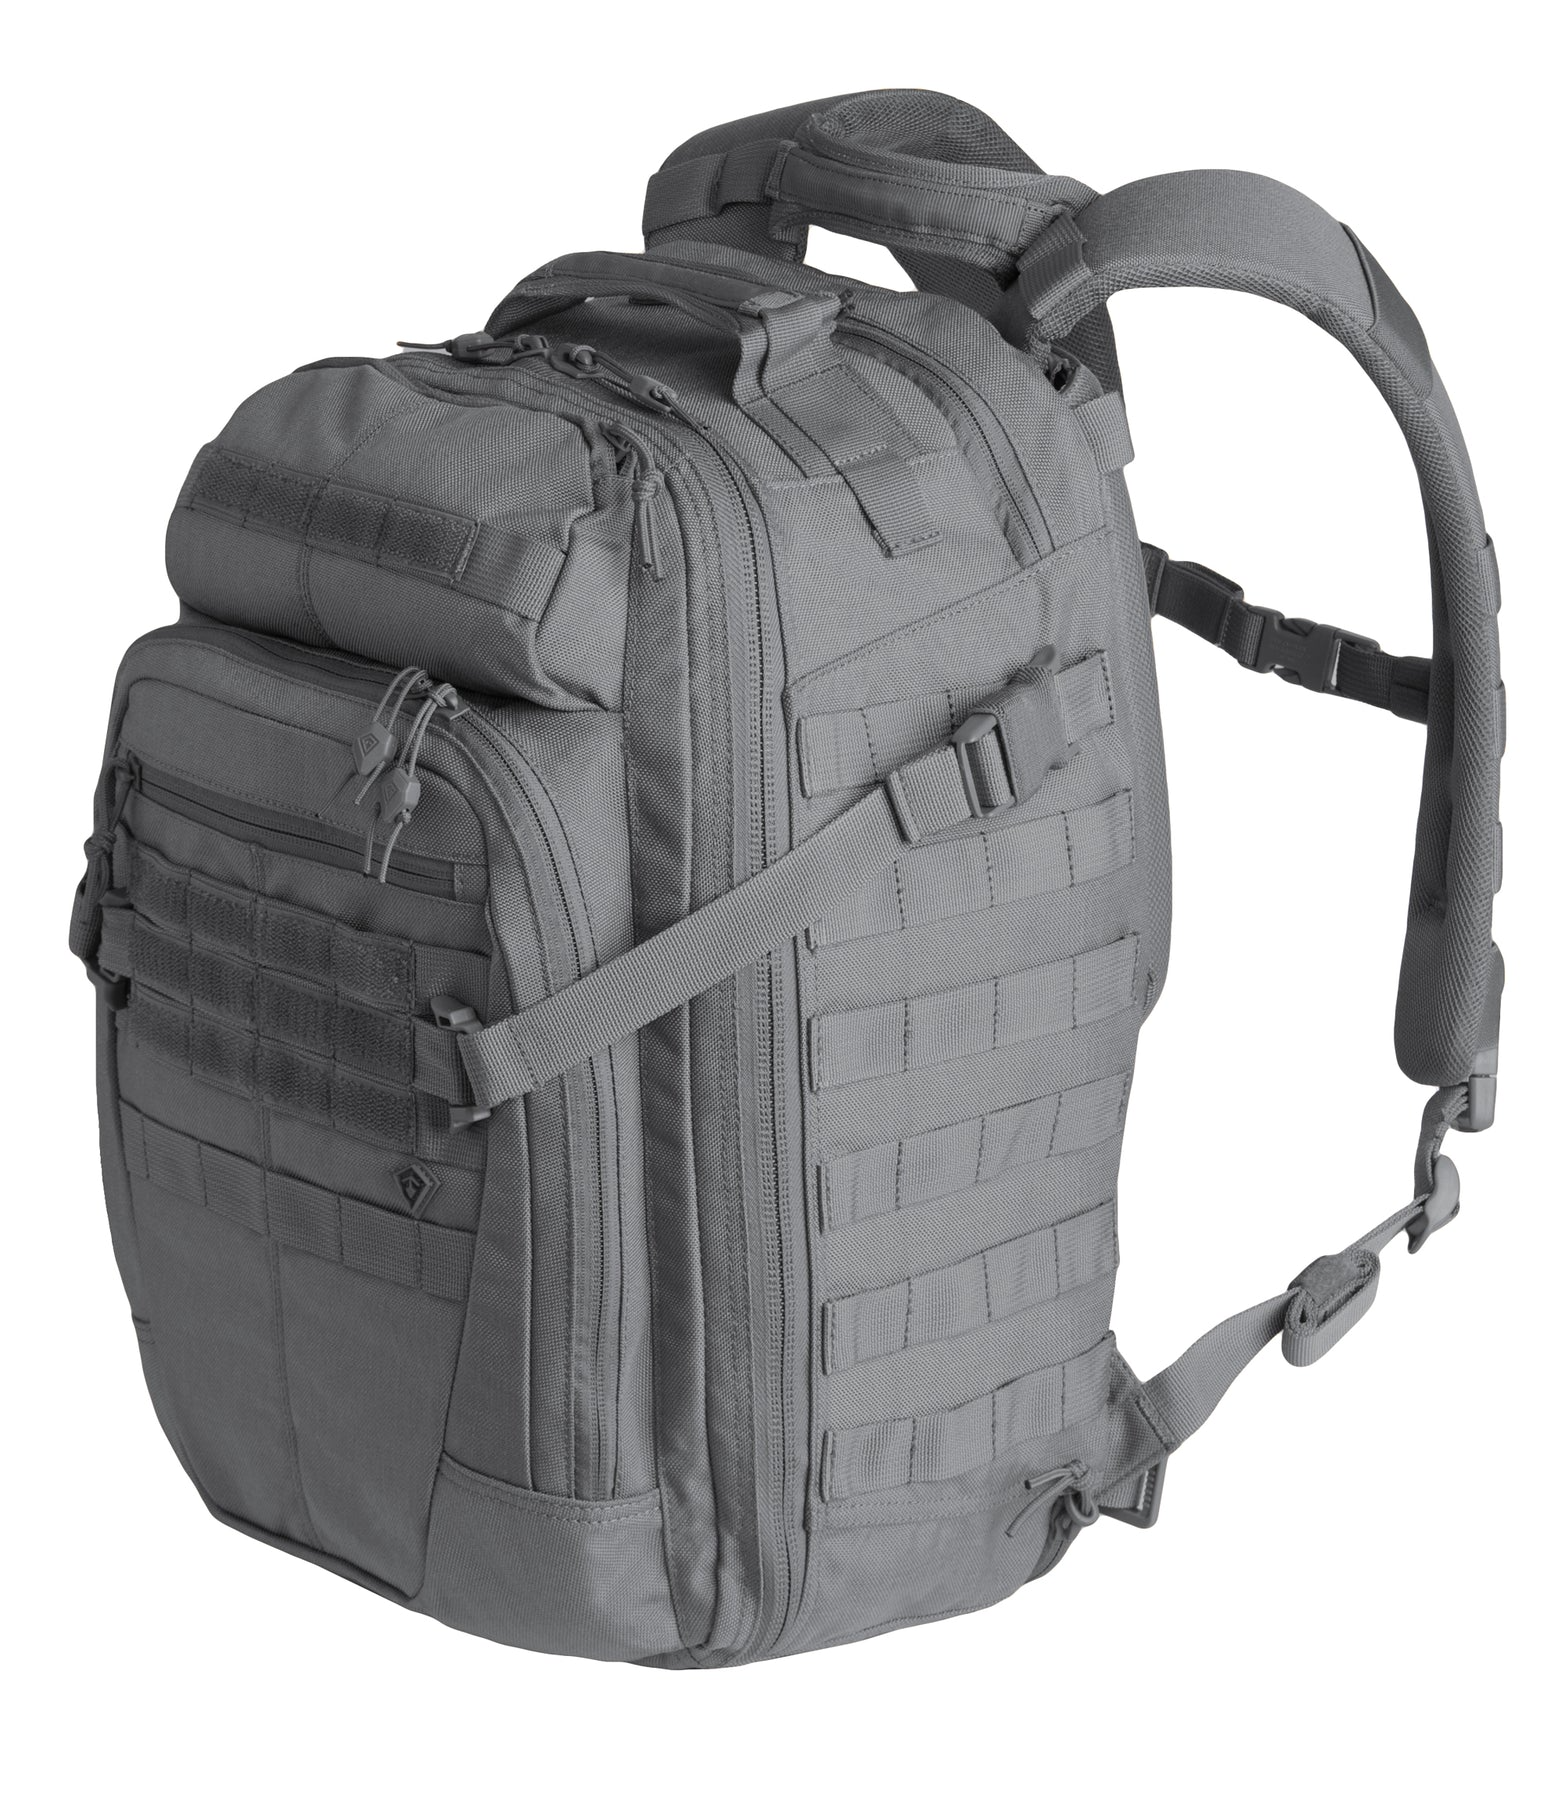 First Tactical Specialist BackPack 0.5D 25L 180006 - Wolf Grey